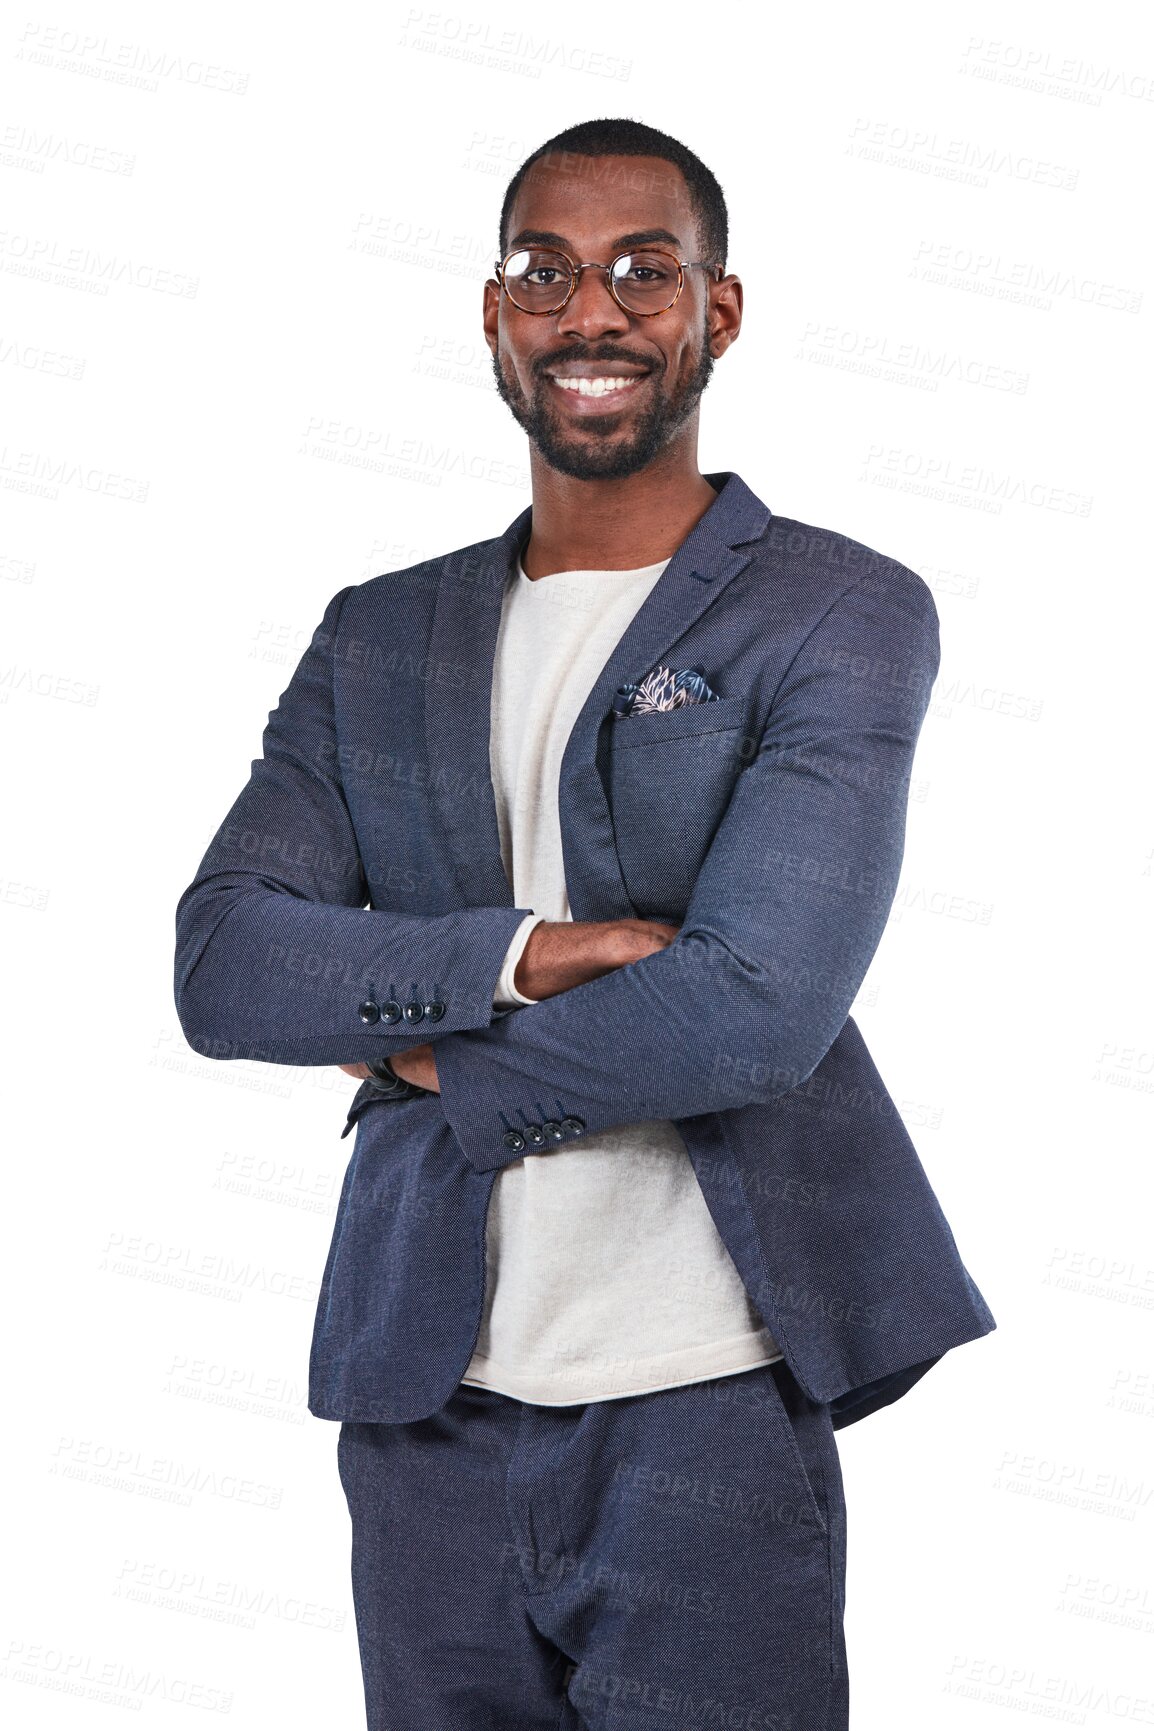 Buy stock photo Happy, crossed arms and portrait of businessman with glasses, vision and confidence for success. Fashion, confident and professional male model with a suit isolated by transparent png background.